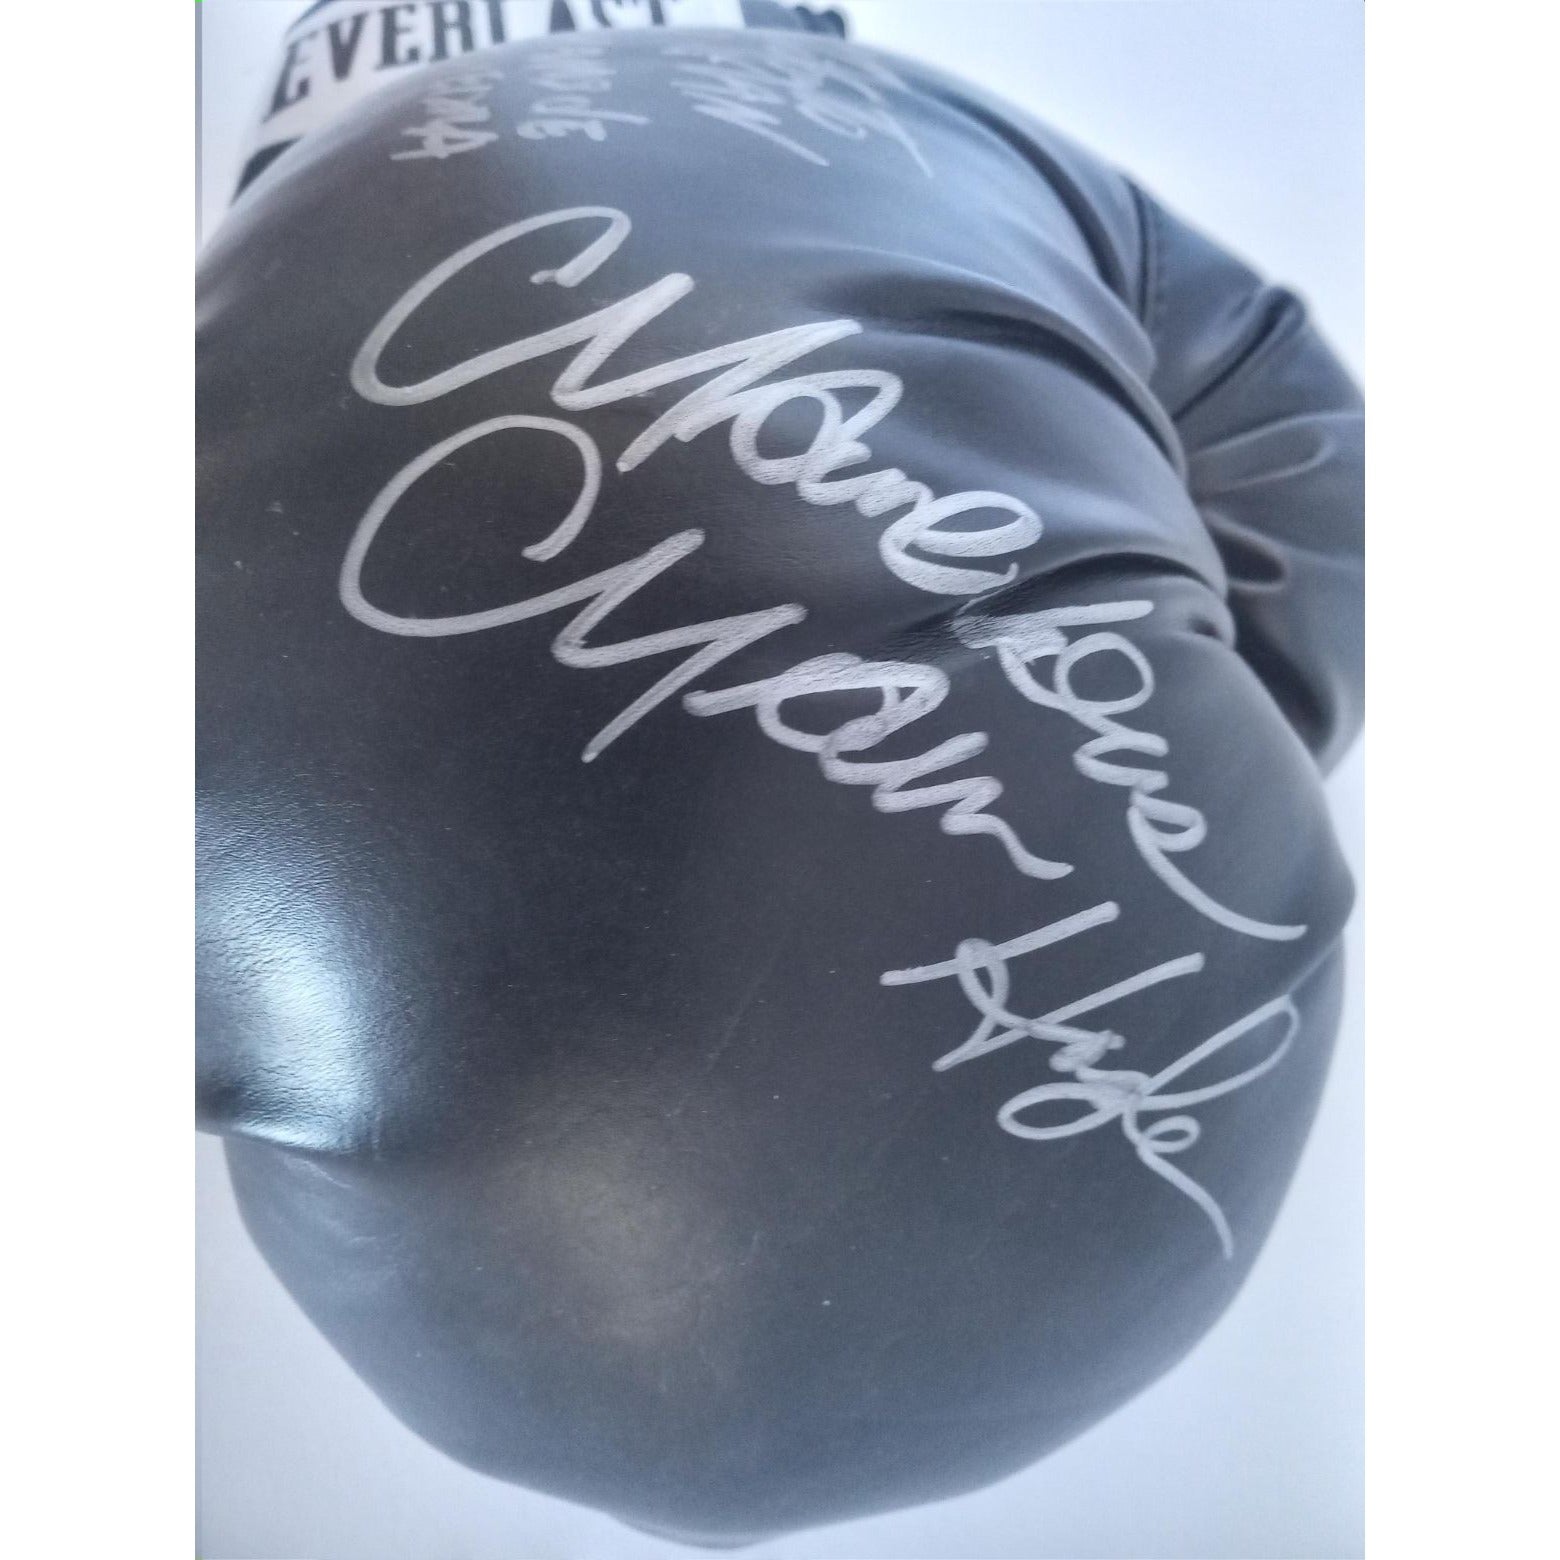 Marvelous Marvin Hagler Roberto Duran Sugar Ray Leonard Everlast leather boxing glove signed with proof